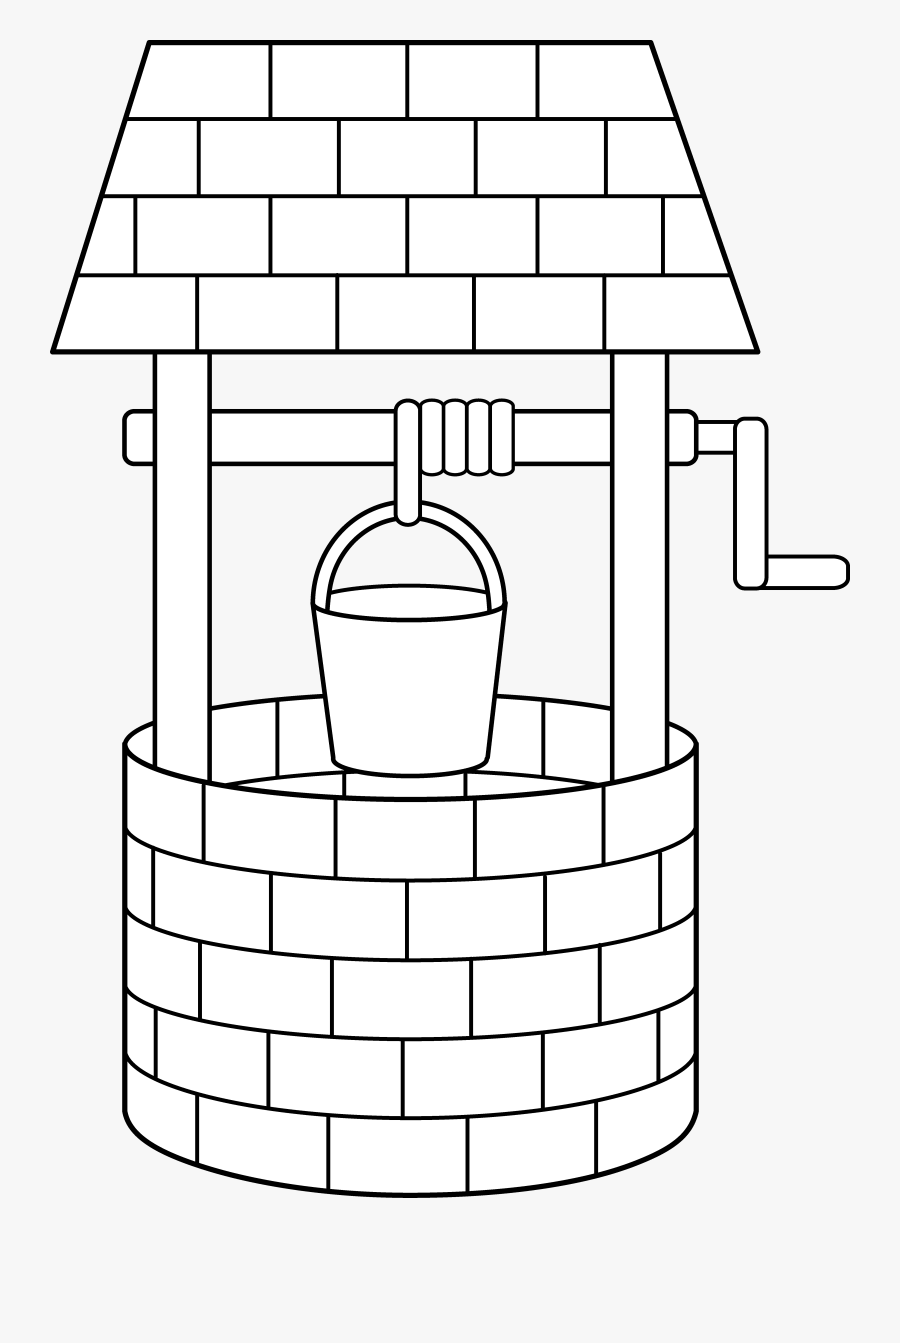 Thumb Image - Well Water Black And White, Transparent Clipart